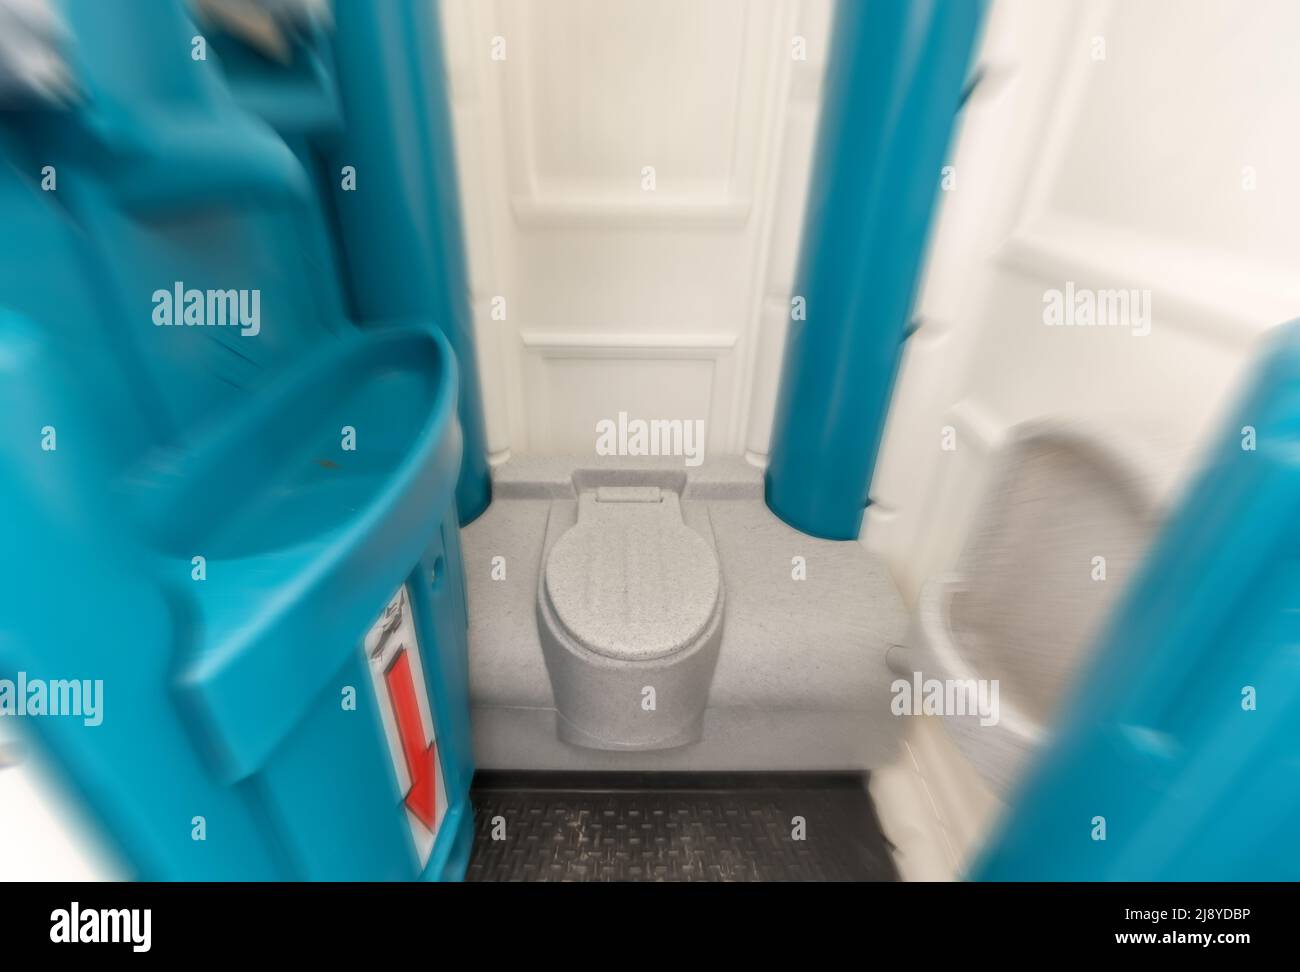 Disgust at public toilets shown with a mobile toilet cabin Stock Photo